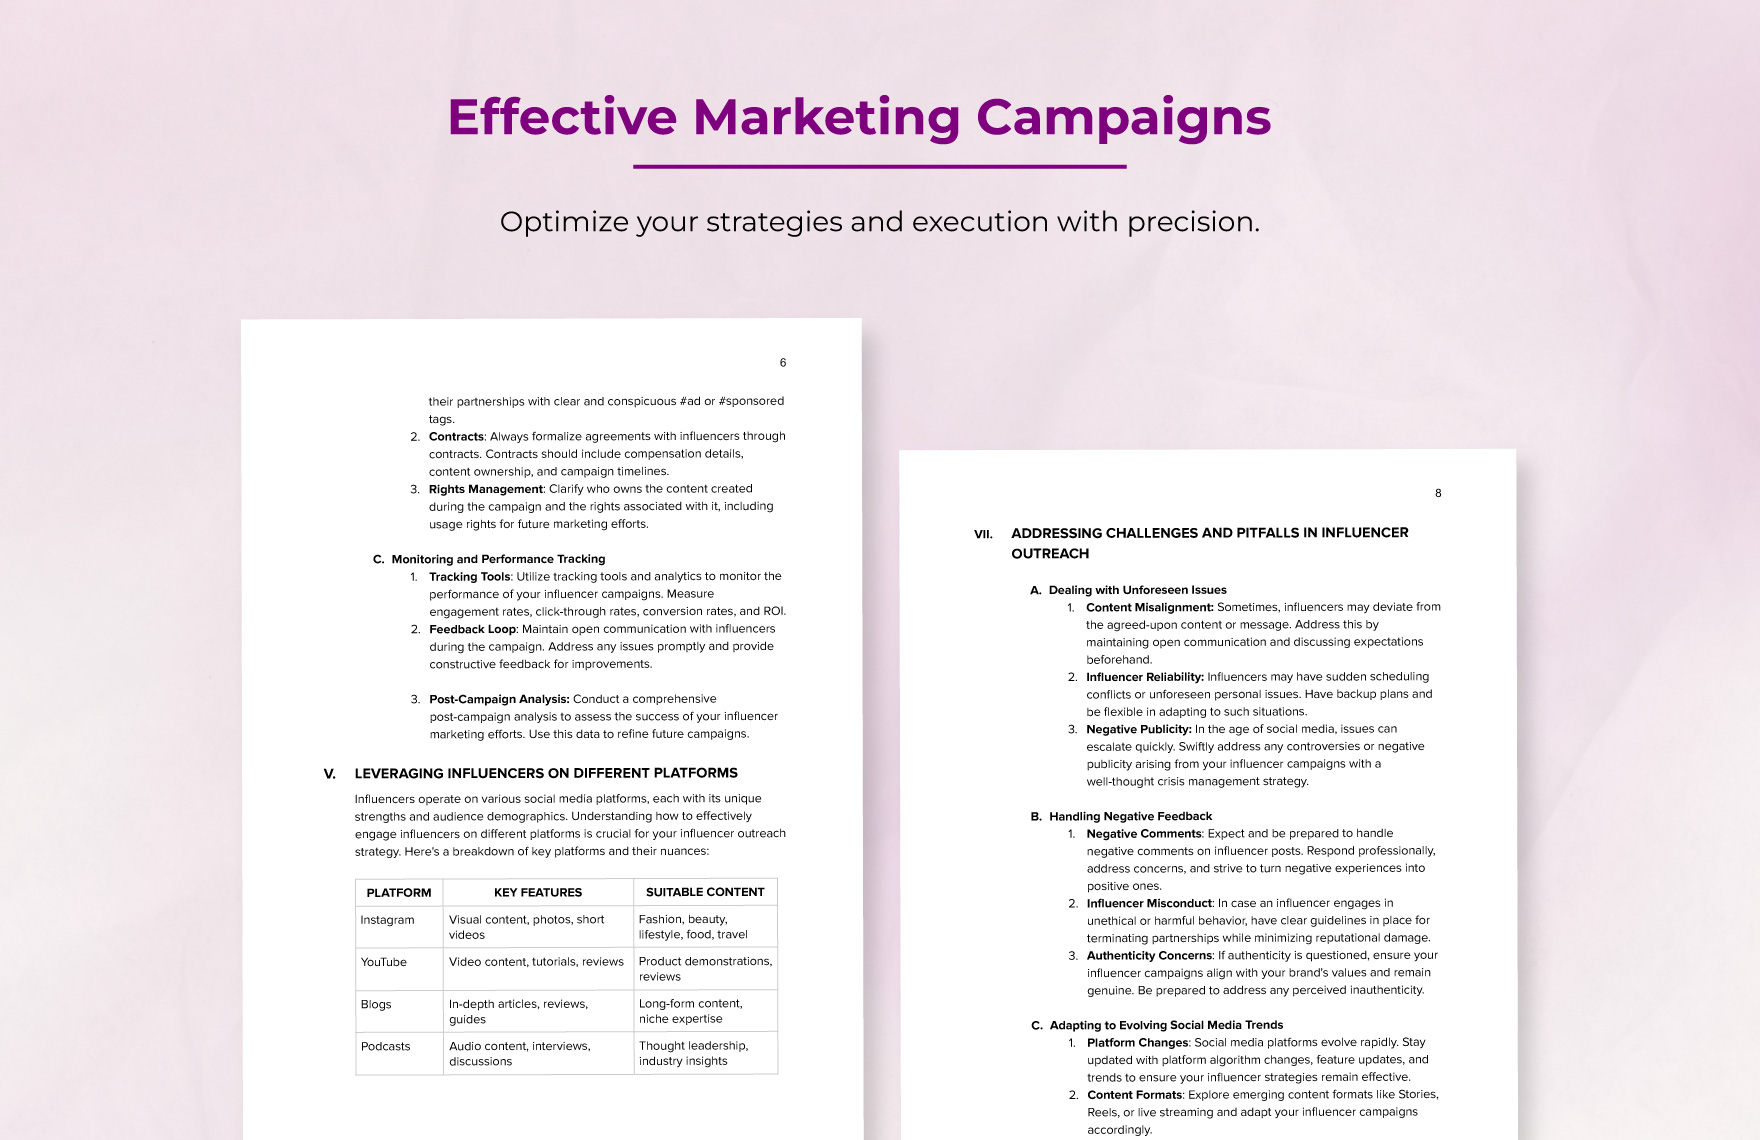 Marketing Influencer Outreach User Guide Template in Word PDF Google